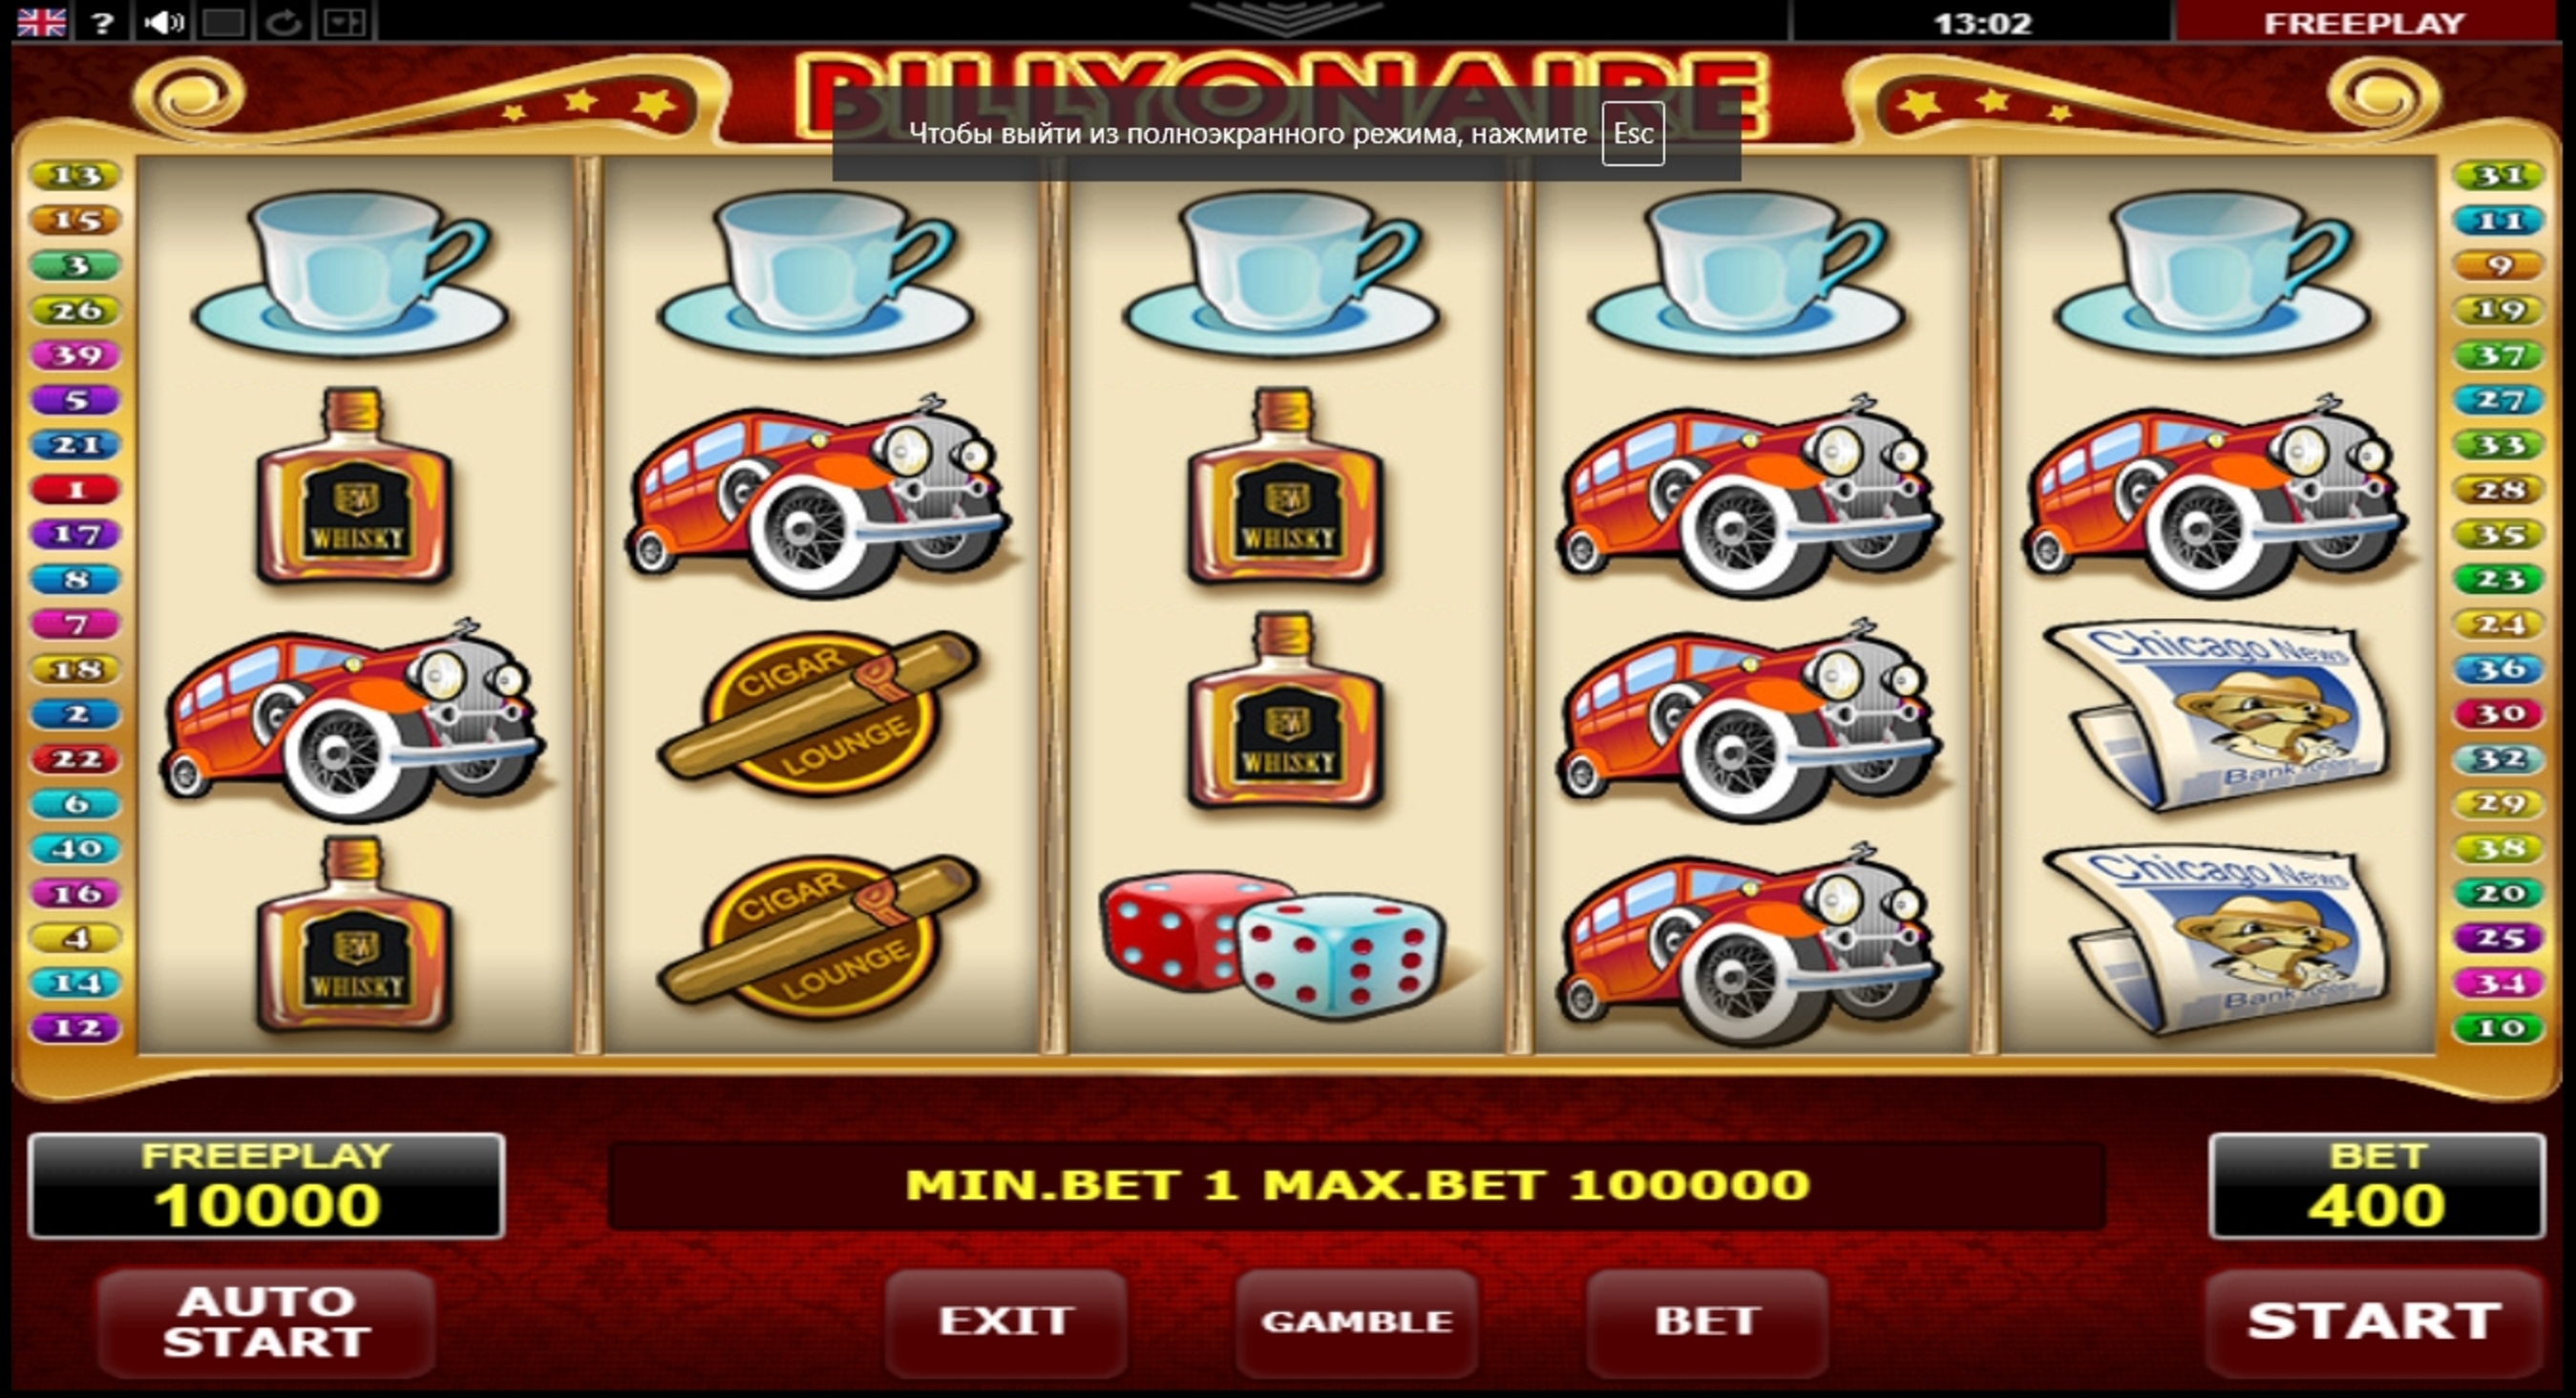 Reels in Billyonaire Slot Game by Amatic Industries